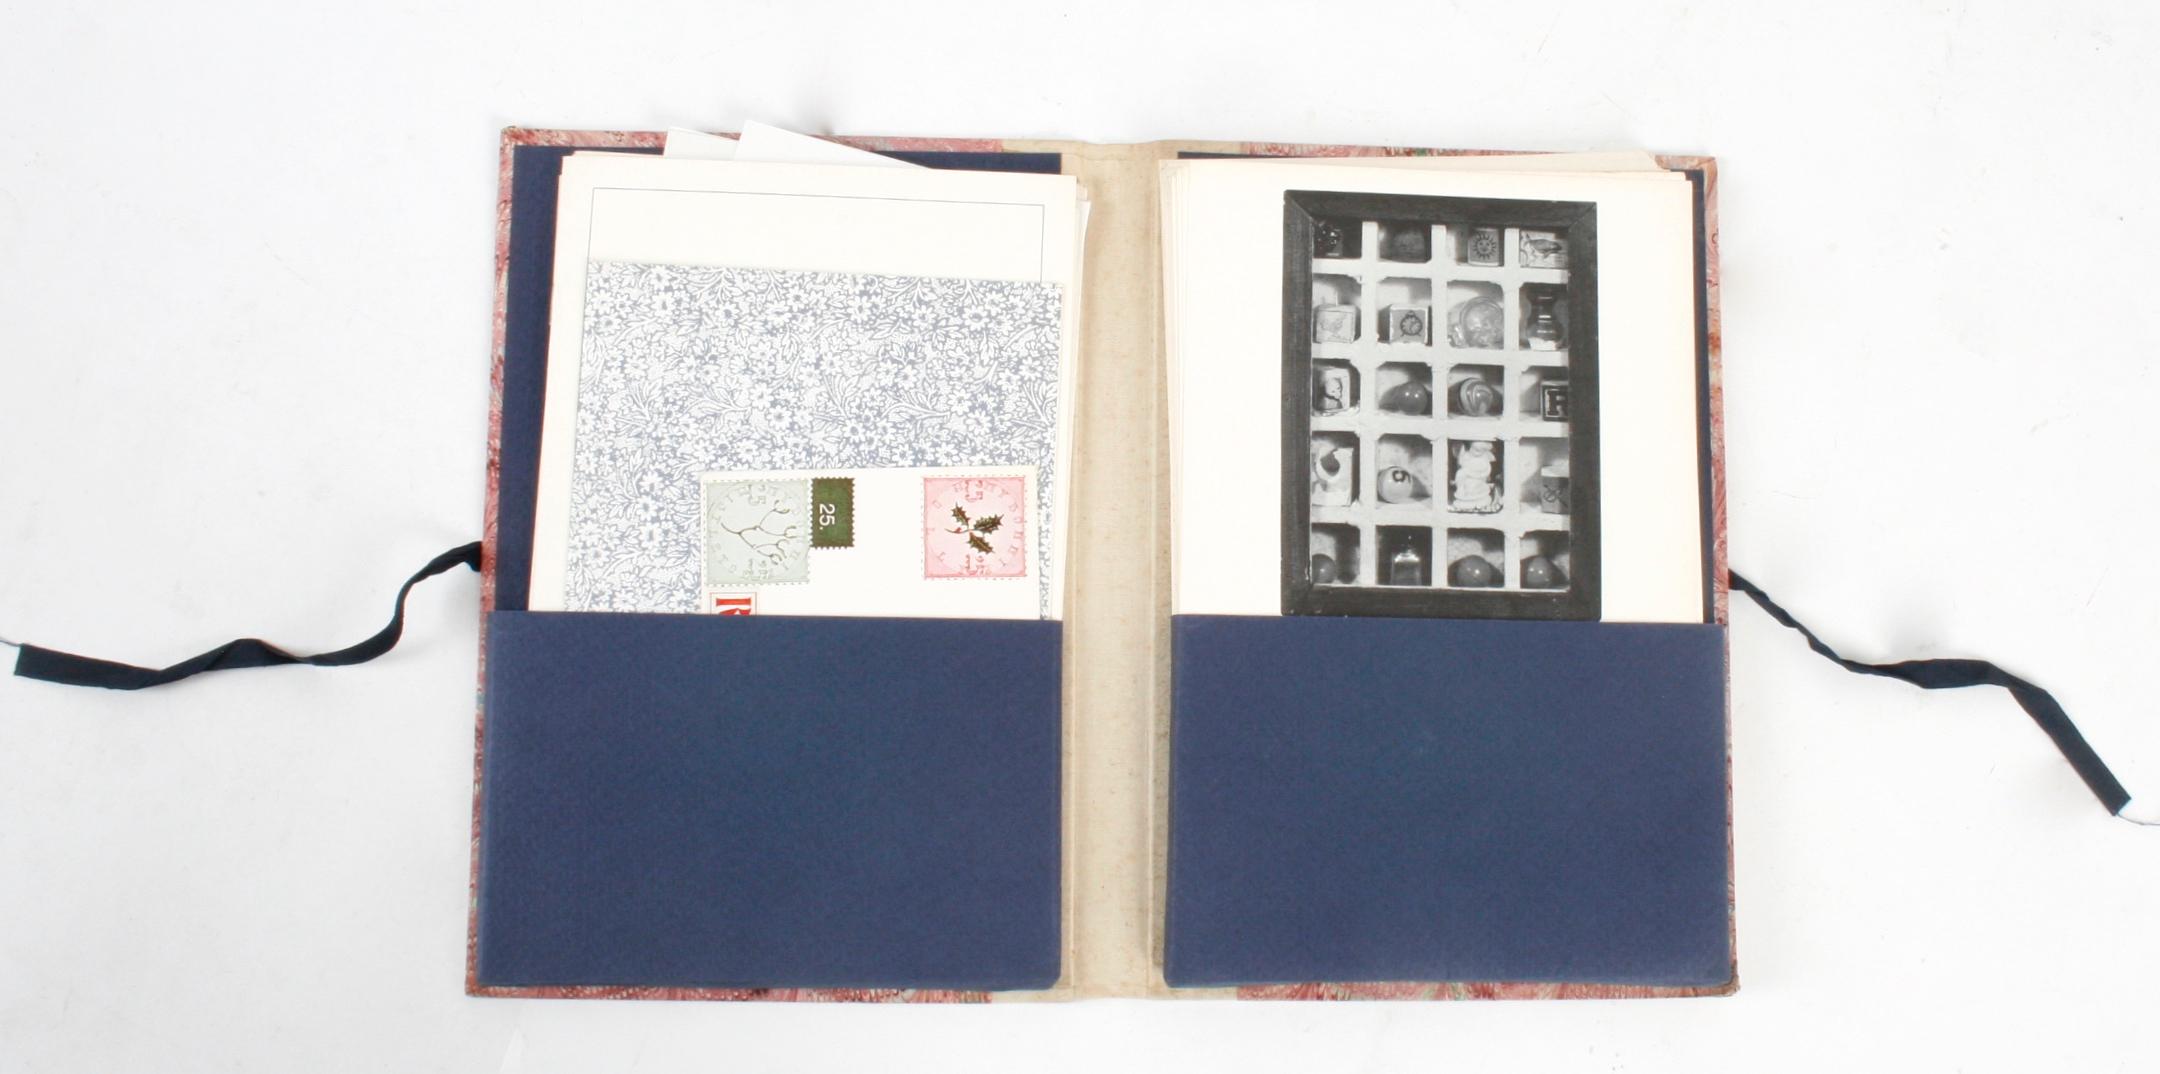 Joseph Cornell Portfolio – catalogue. New York: Leo Castelli Gallery, 1976. Hardcover portfolio with tie closure. A catalogue from a Leo Castelli exhibition of Joseph Cornell's work in 1976. The left side of the piece contains a bibliography, a